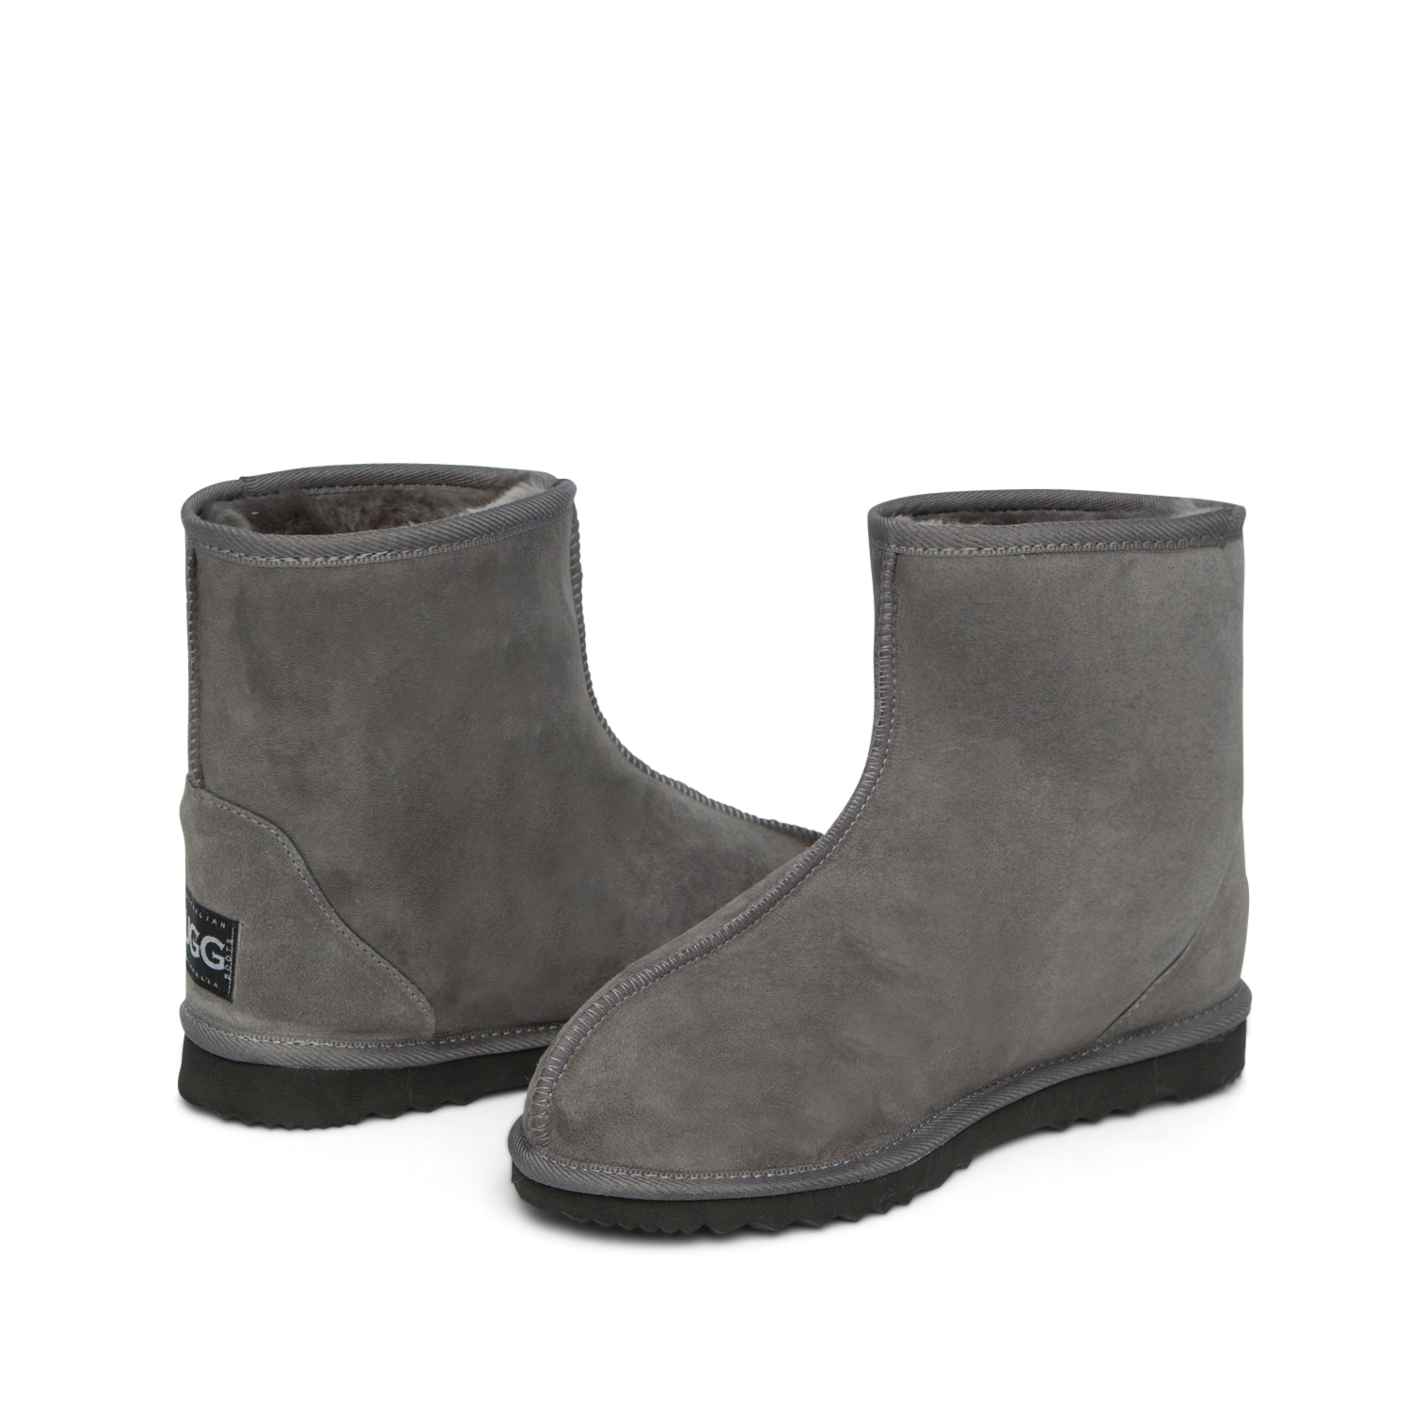 Men's Ankle Boots, seam in middle of front in grey